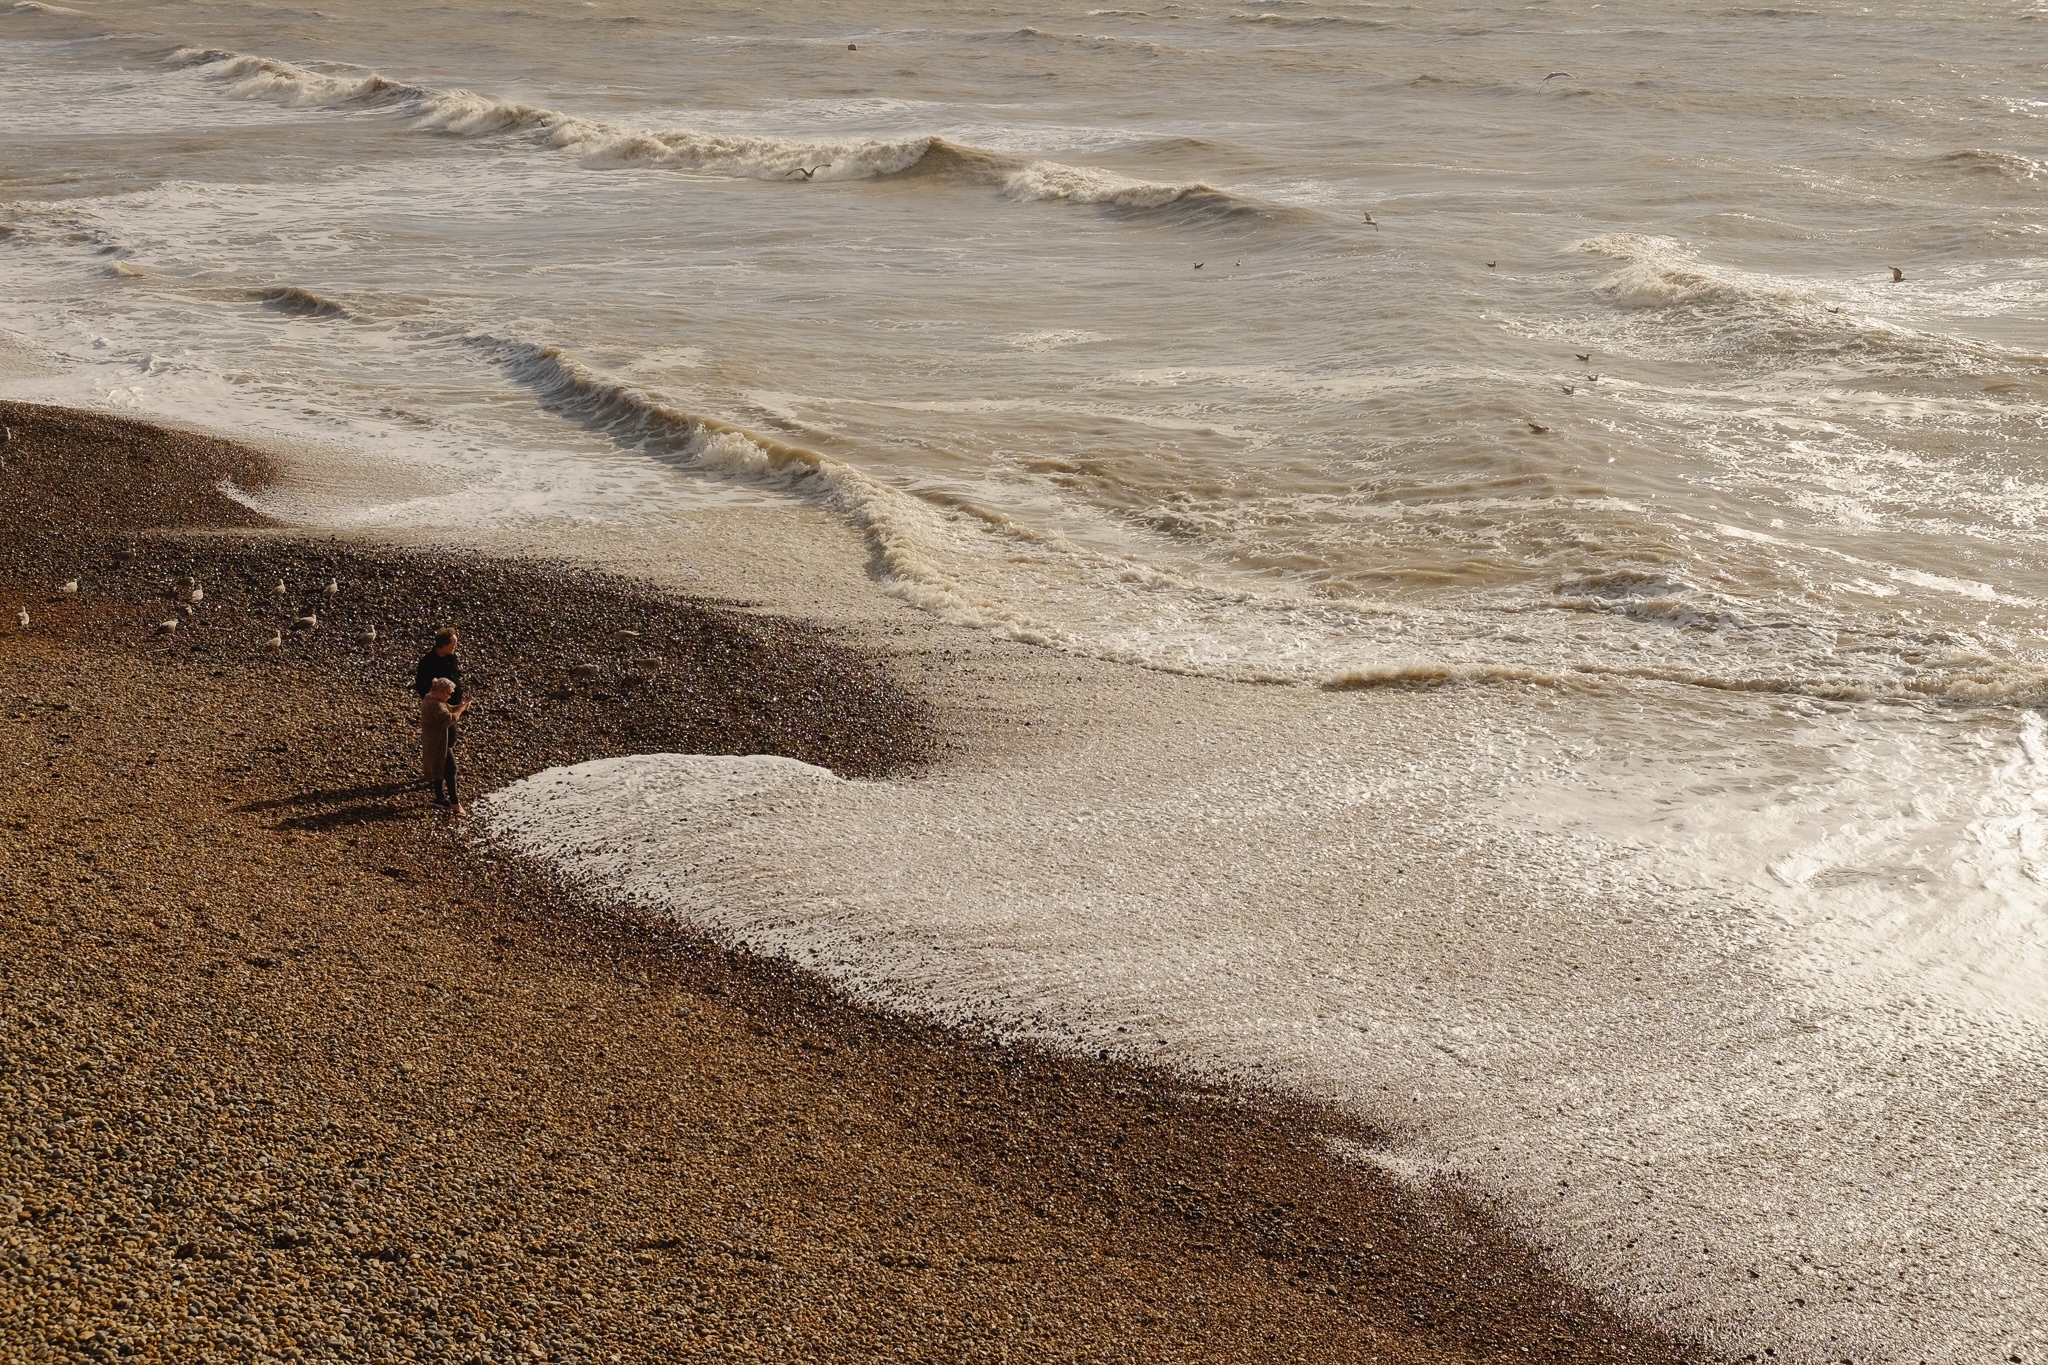 A couple stands on the pebbled beach photographing the waves as they crash up towards them and withdraw. The pebbles swell with sound as they bump each other, disturbed by the wave.